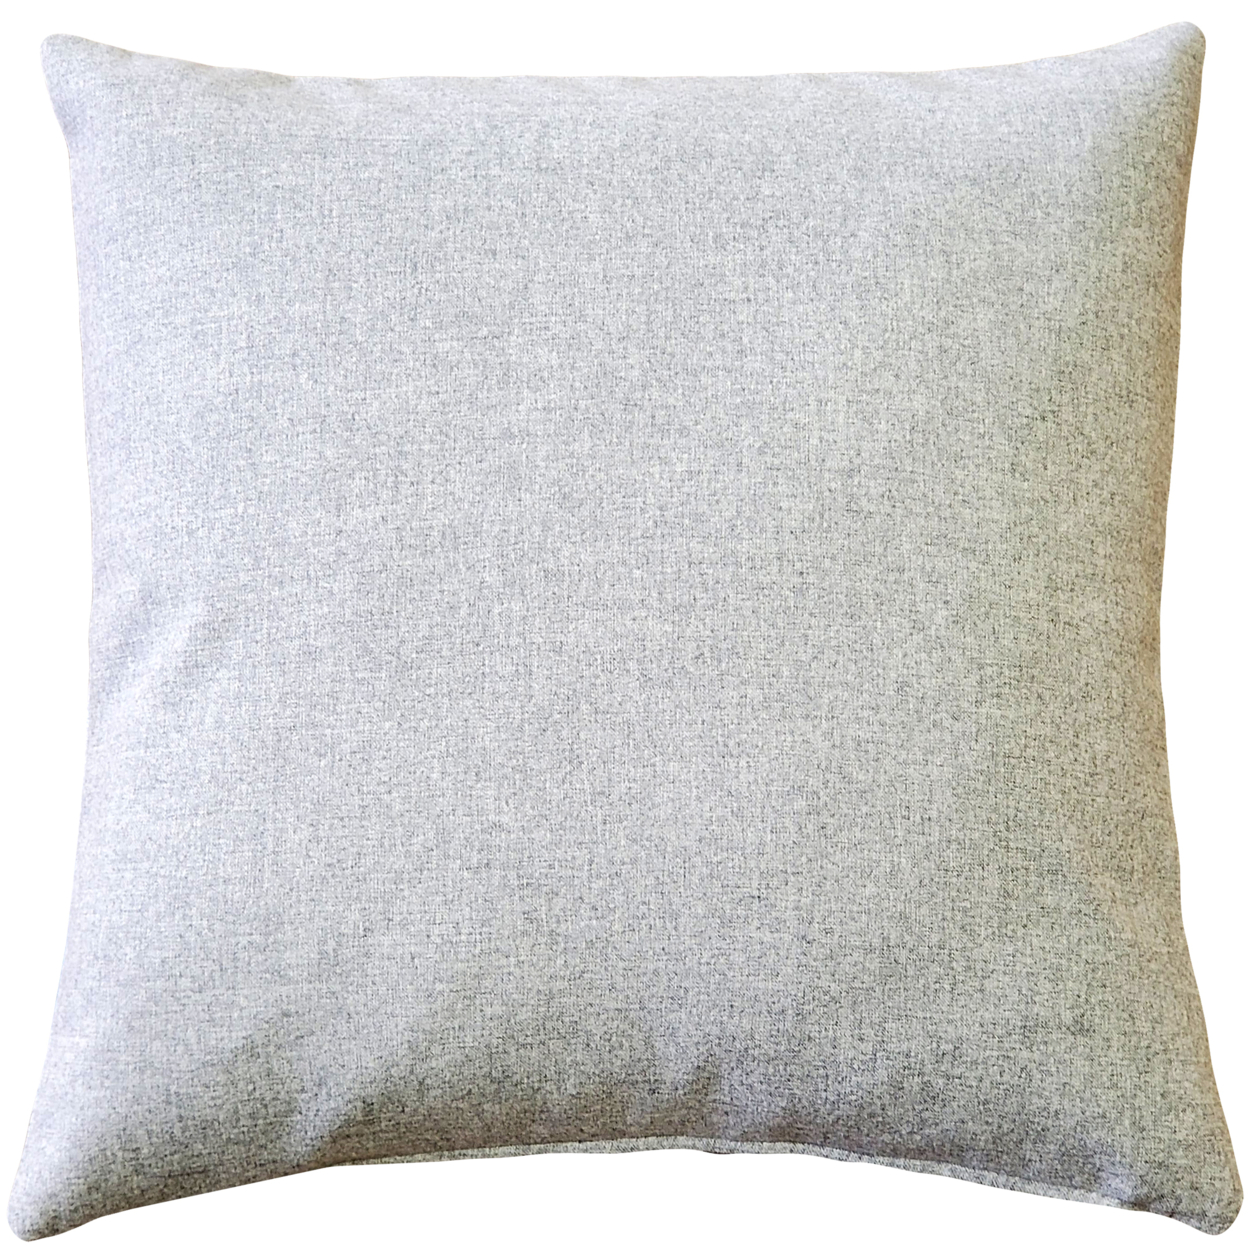 Boketto Paradiso Blue Throw Pillow 19x19 Inches Square, Complete Pillow With Polyfill Pillow Insert